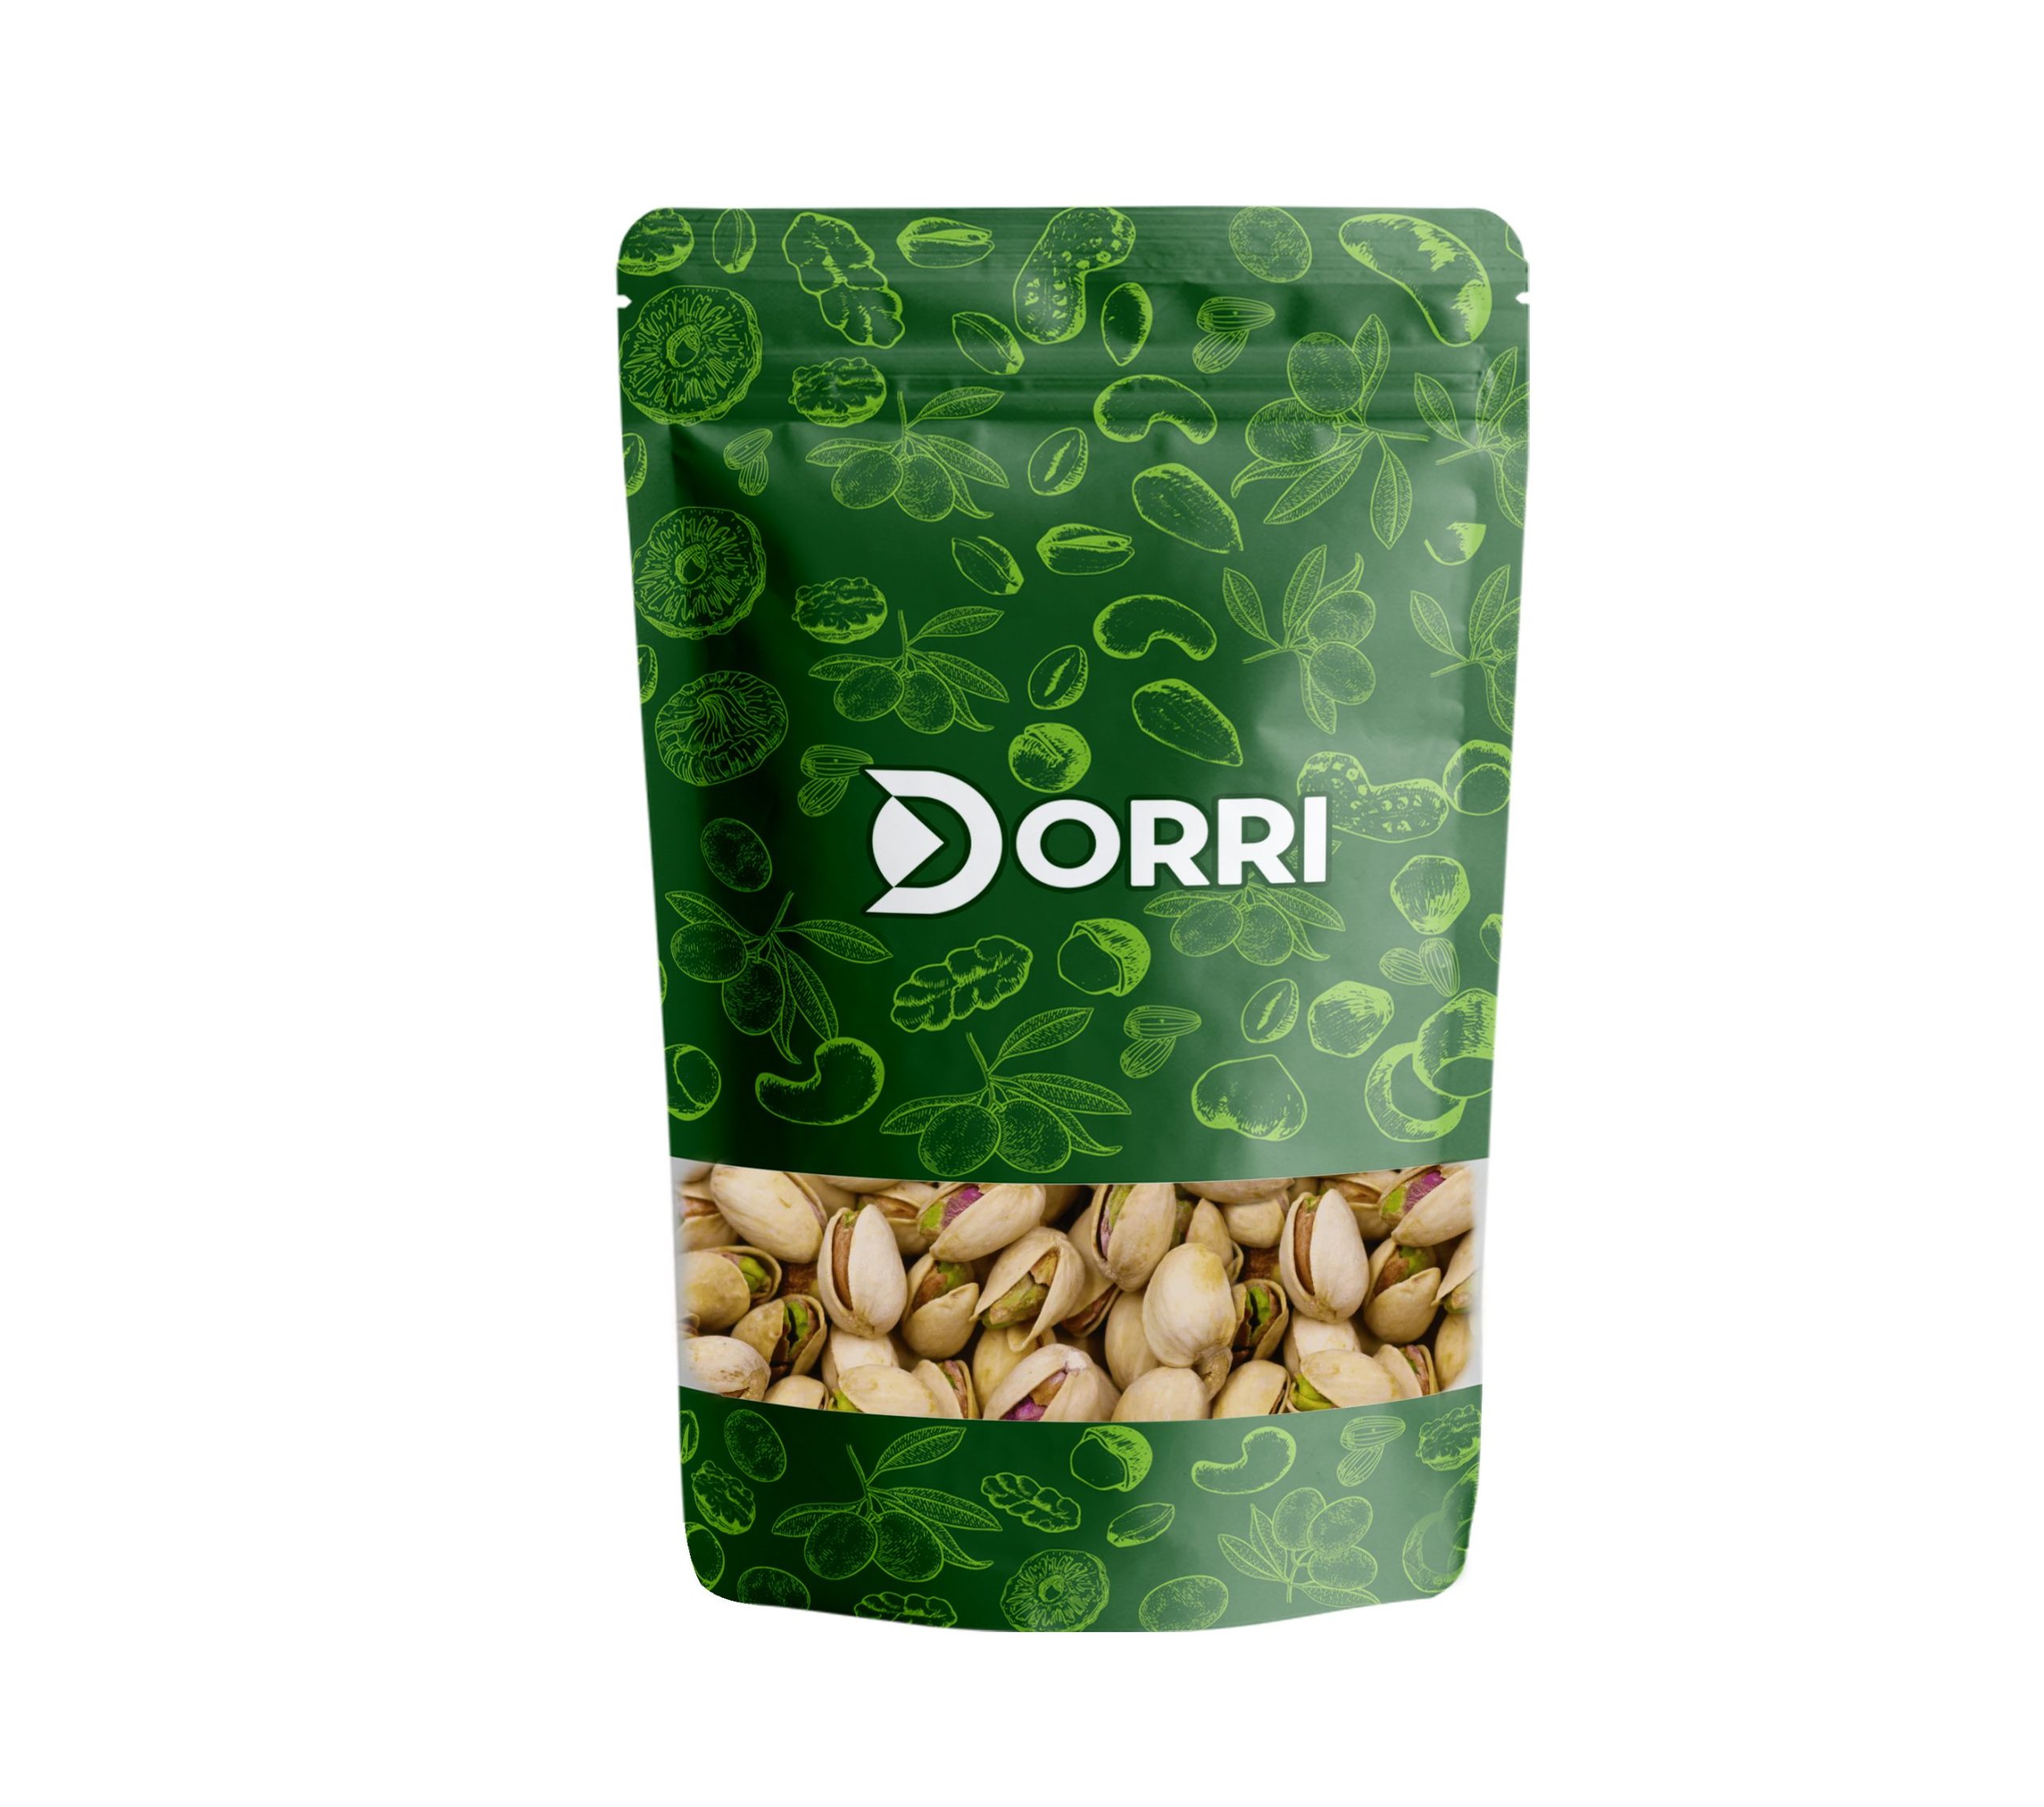 Dorri - Roasted and Salted Pistachio (In Shell)